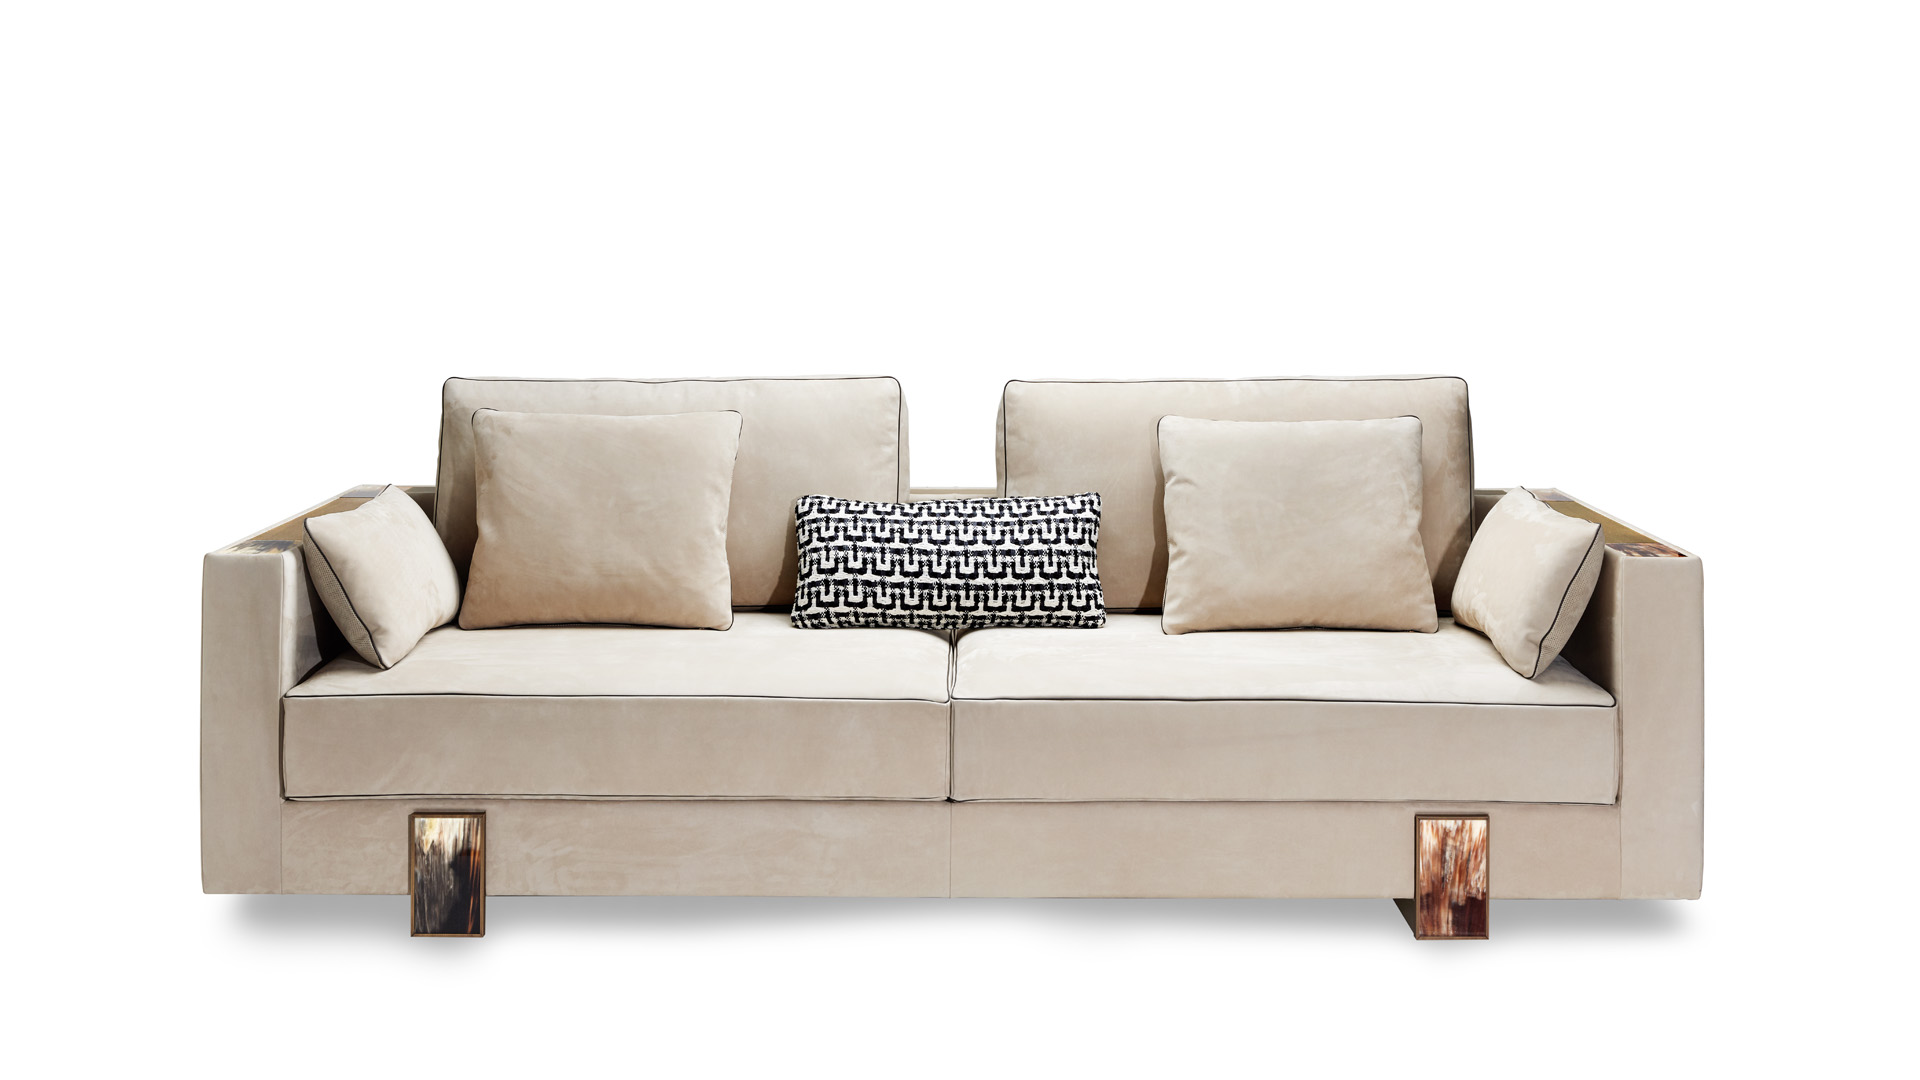 Sofas and seats - Adriano sofa in nabuk leather with horn details mod. 6036L - cover - Arcahorn